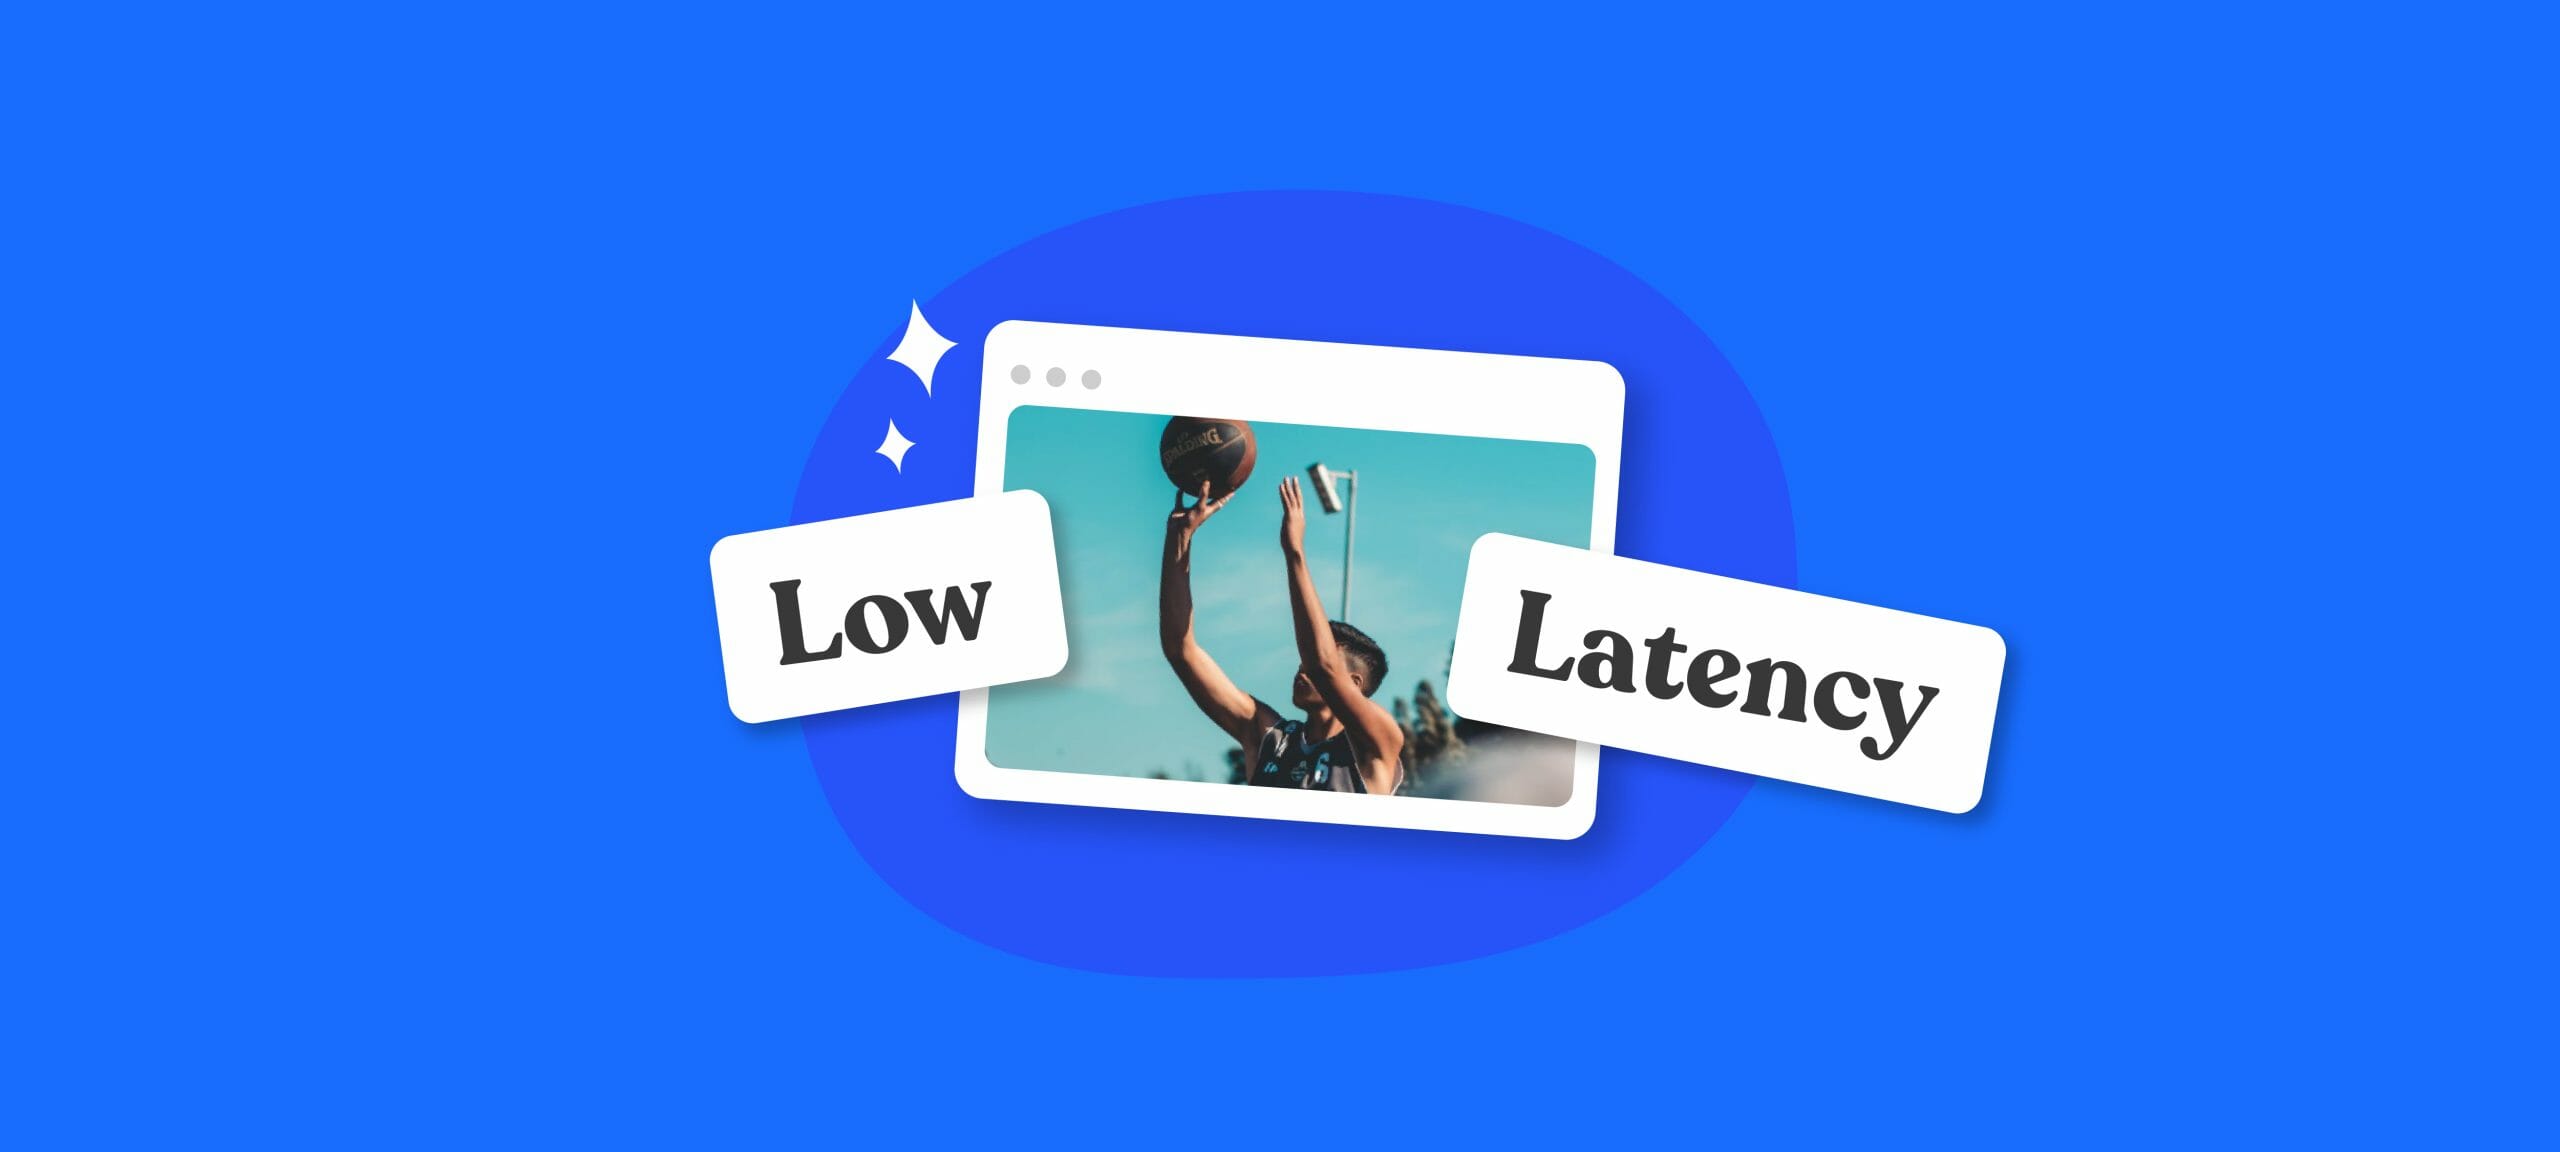 Low Latency Video Streaming: Stream without Delay Using Castr